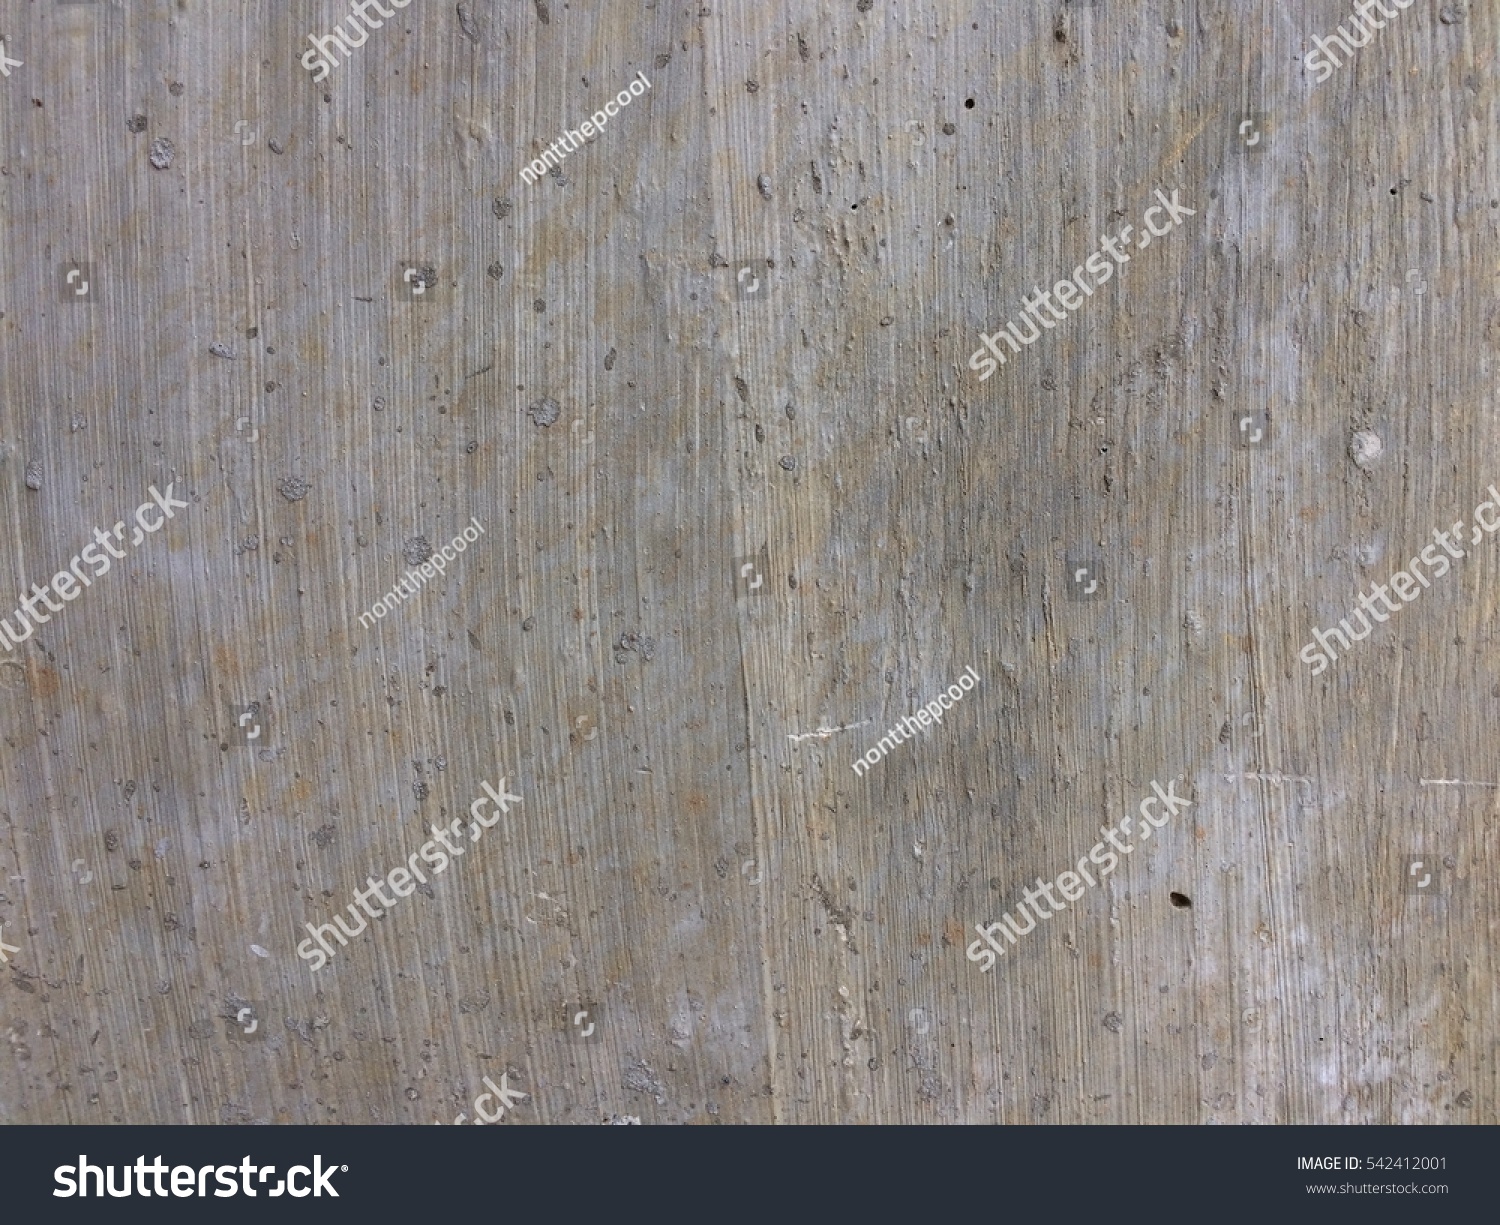 Cement dirty floor texture for background design  #542412001